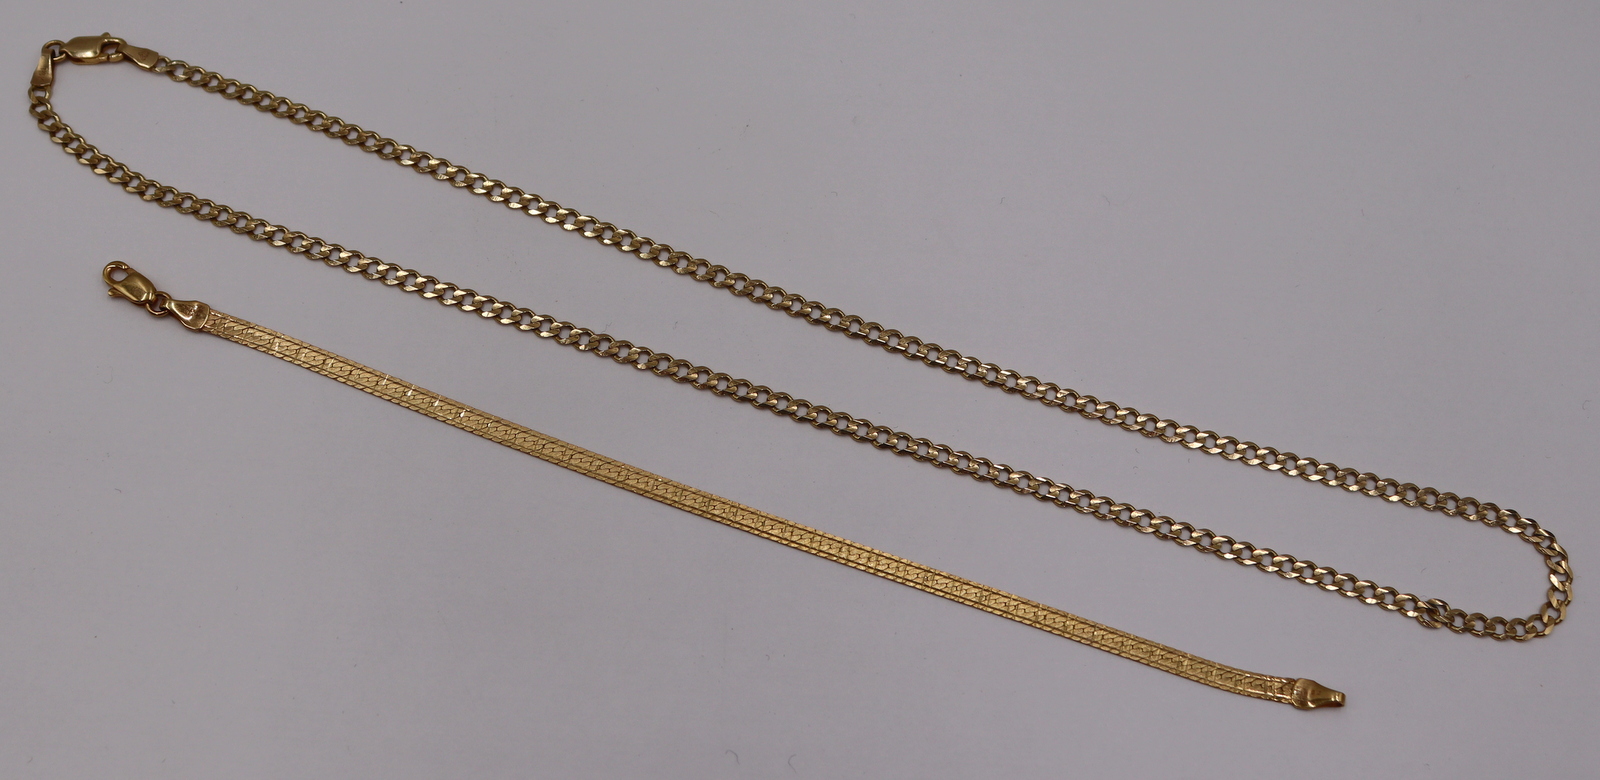 JEWELRY 14KT GOLD CHAIN GROUPING  3bc047